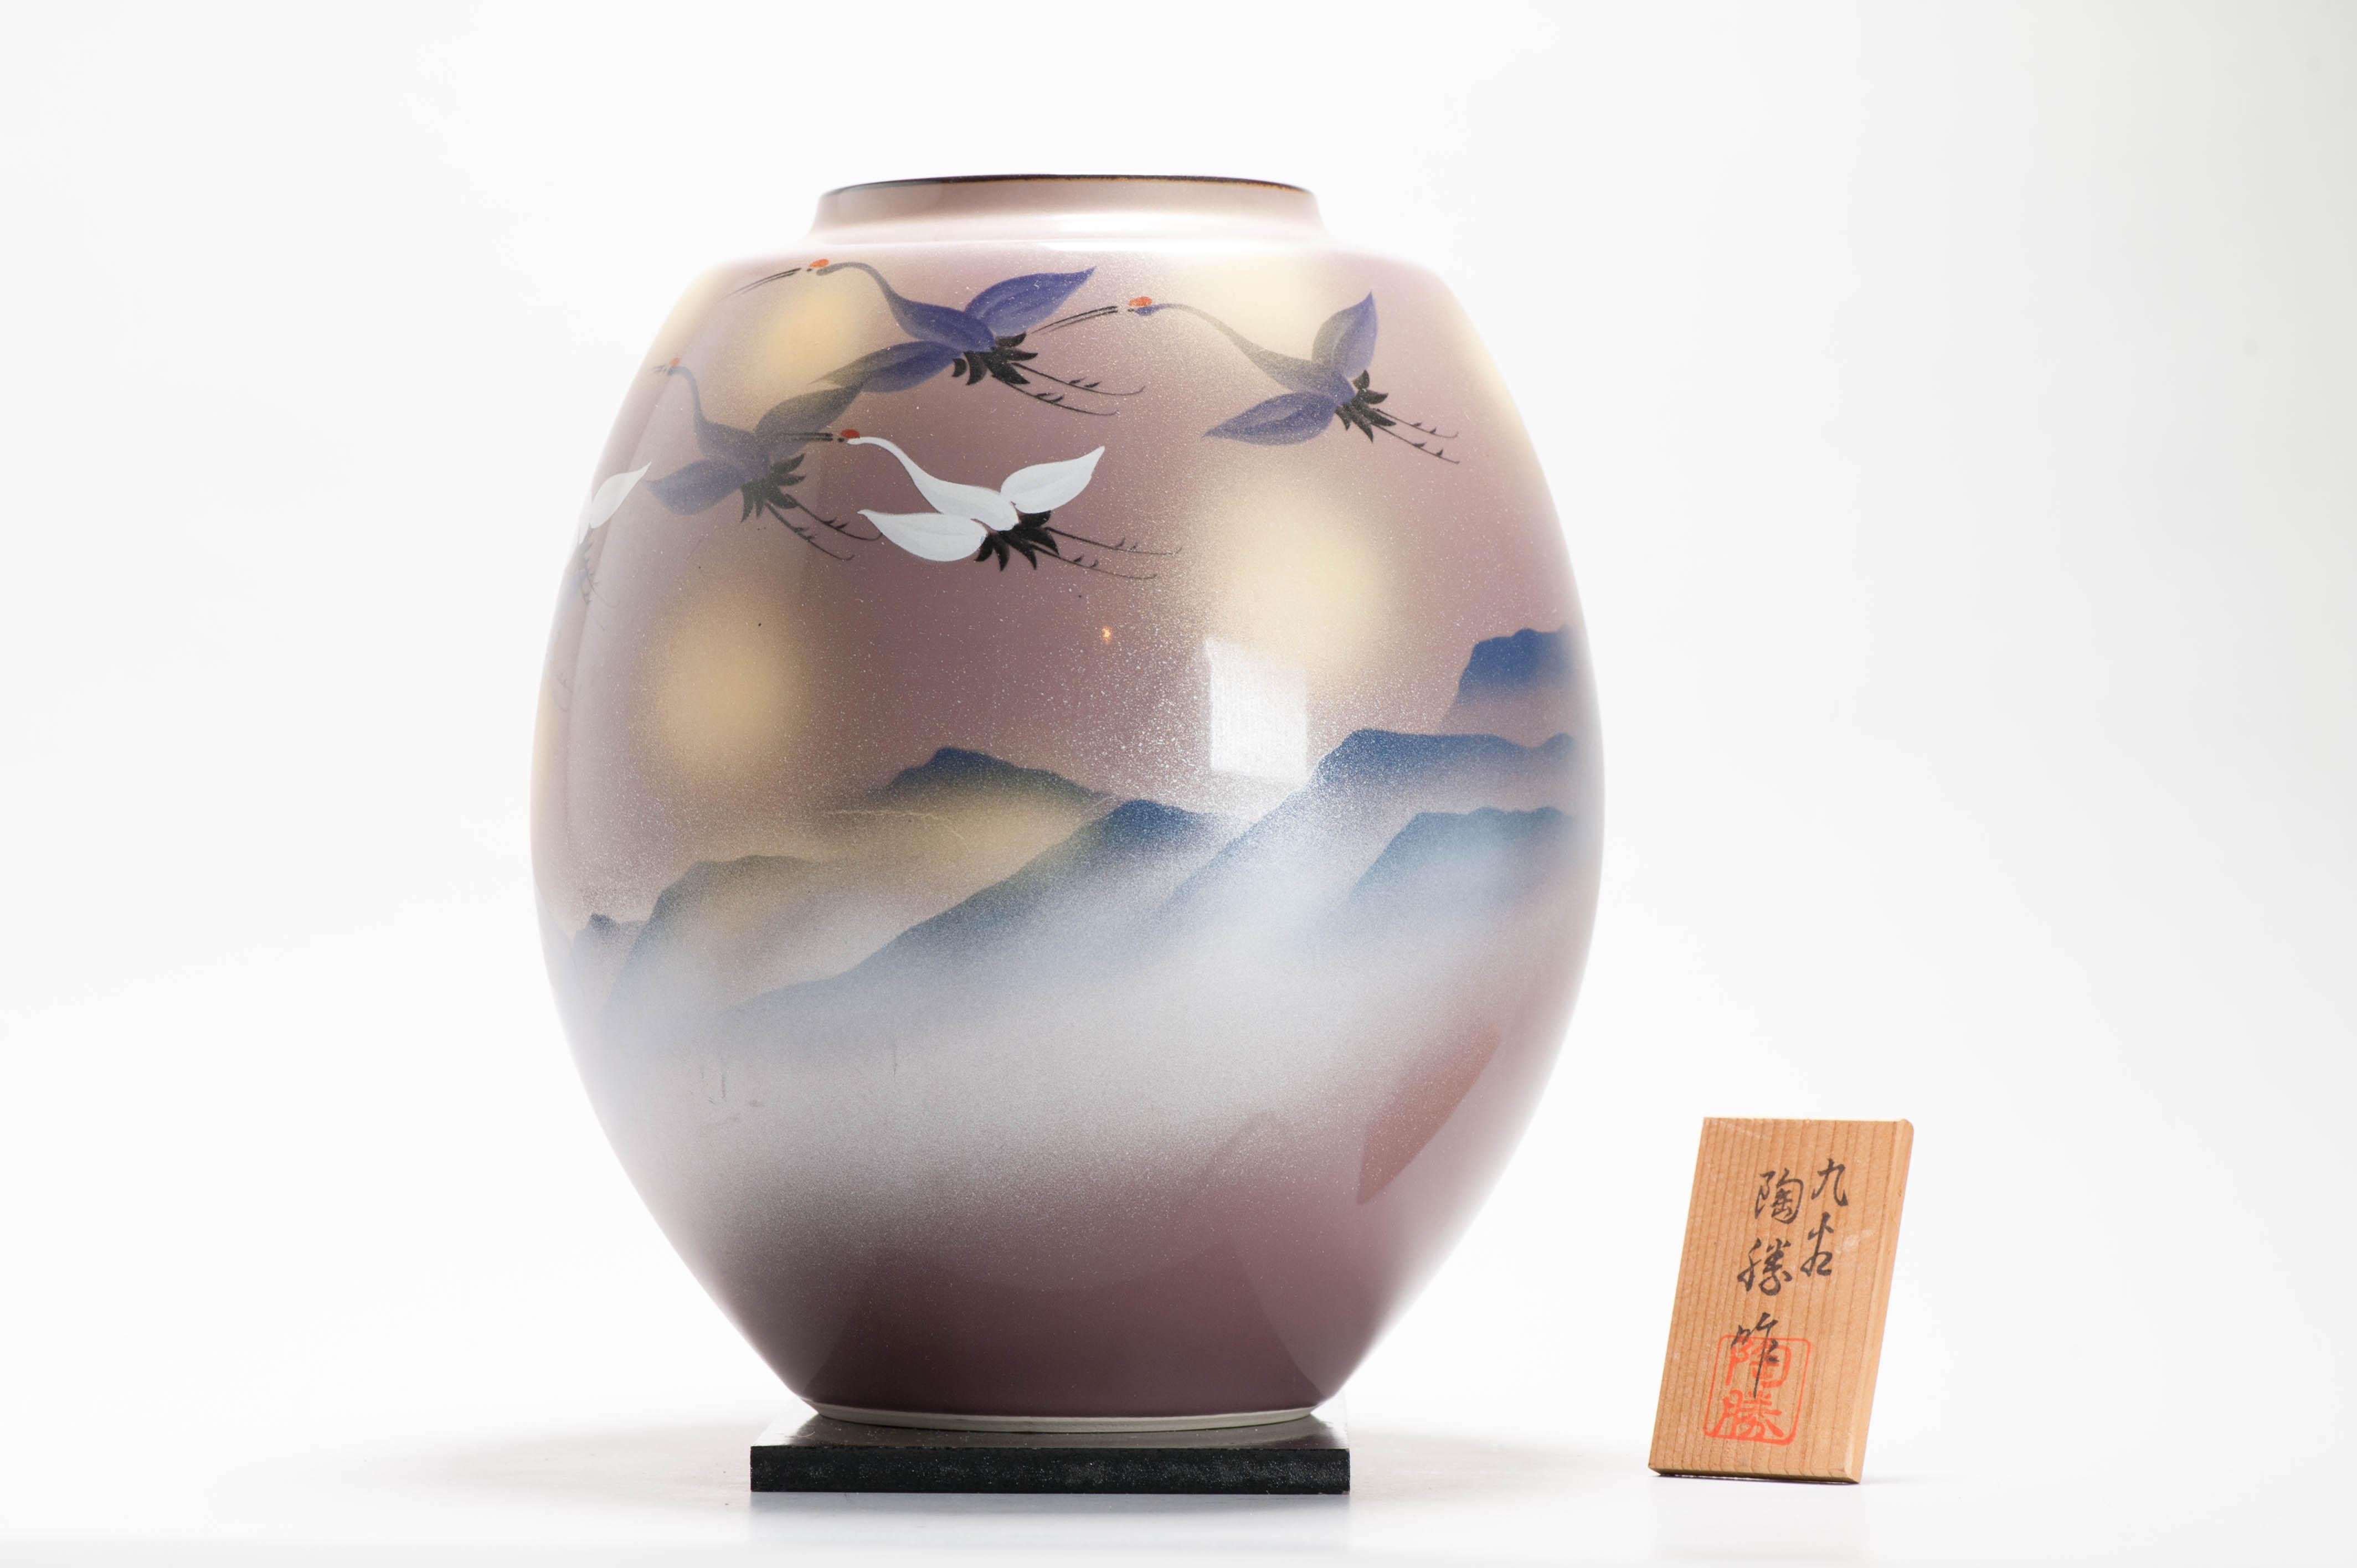 Lovely and rare piece.

A superb blue and white porcelain vase, with a winter landscape. Made by Fuji Shumei

Fujii Mr. Aki Fujii's specialty is the technique of drawing a mountain by simulating the veins of a leaf, called the “leaf technique”, as